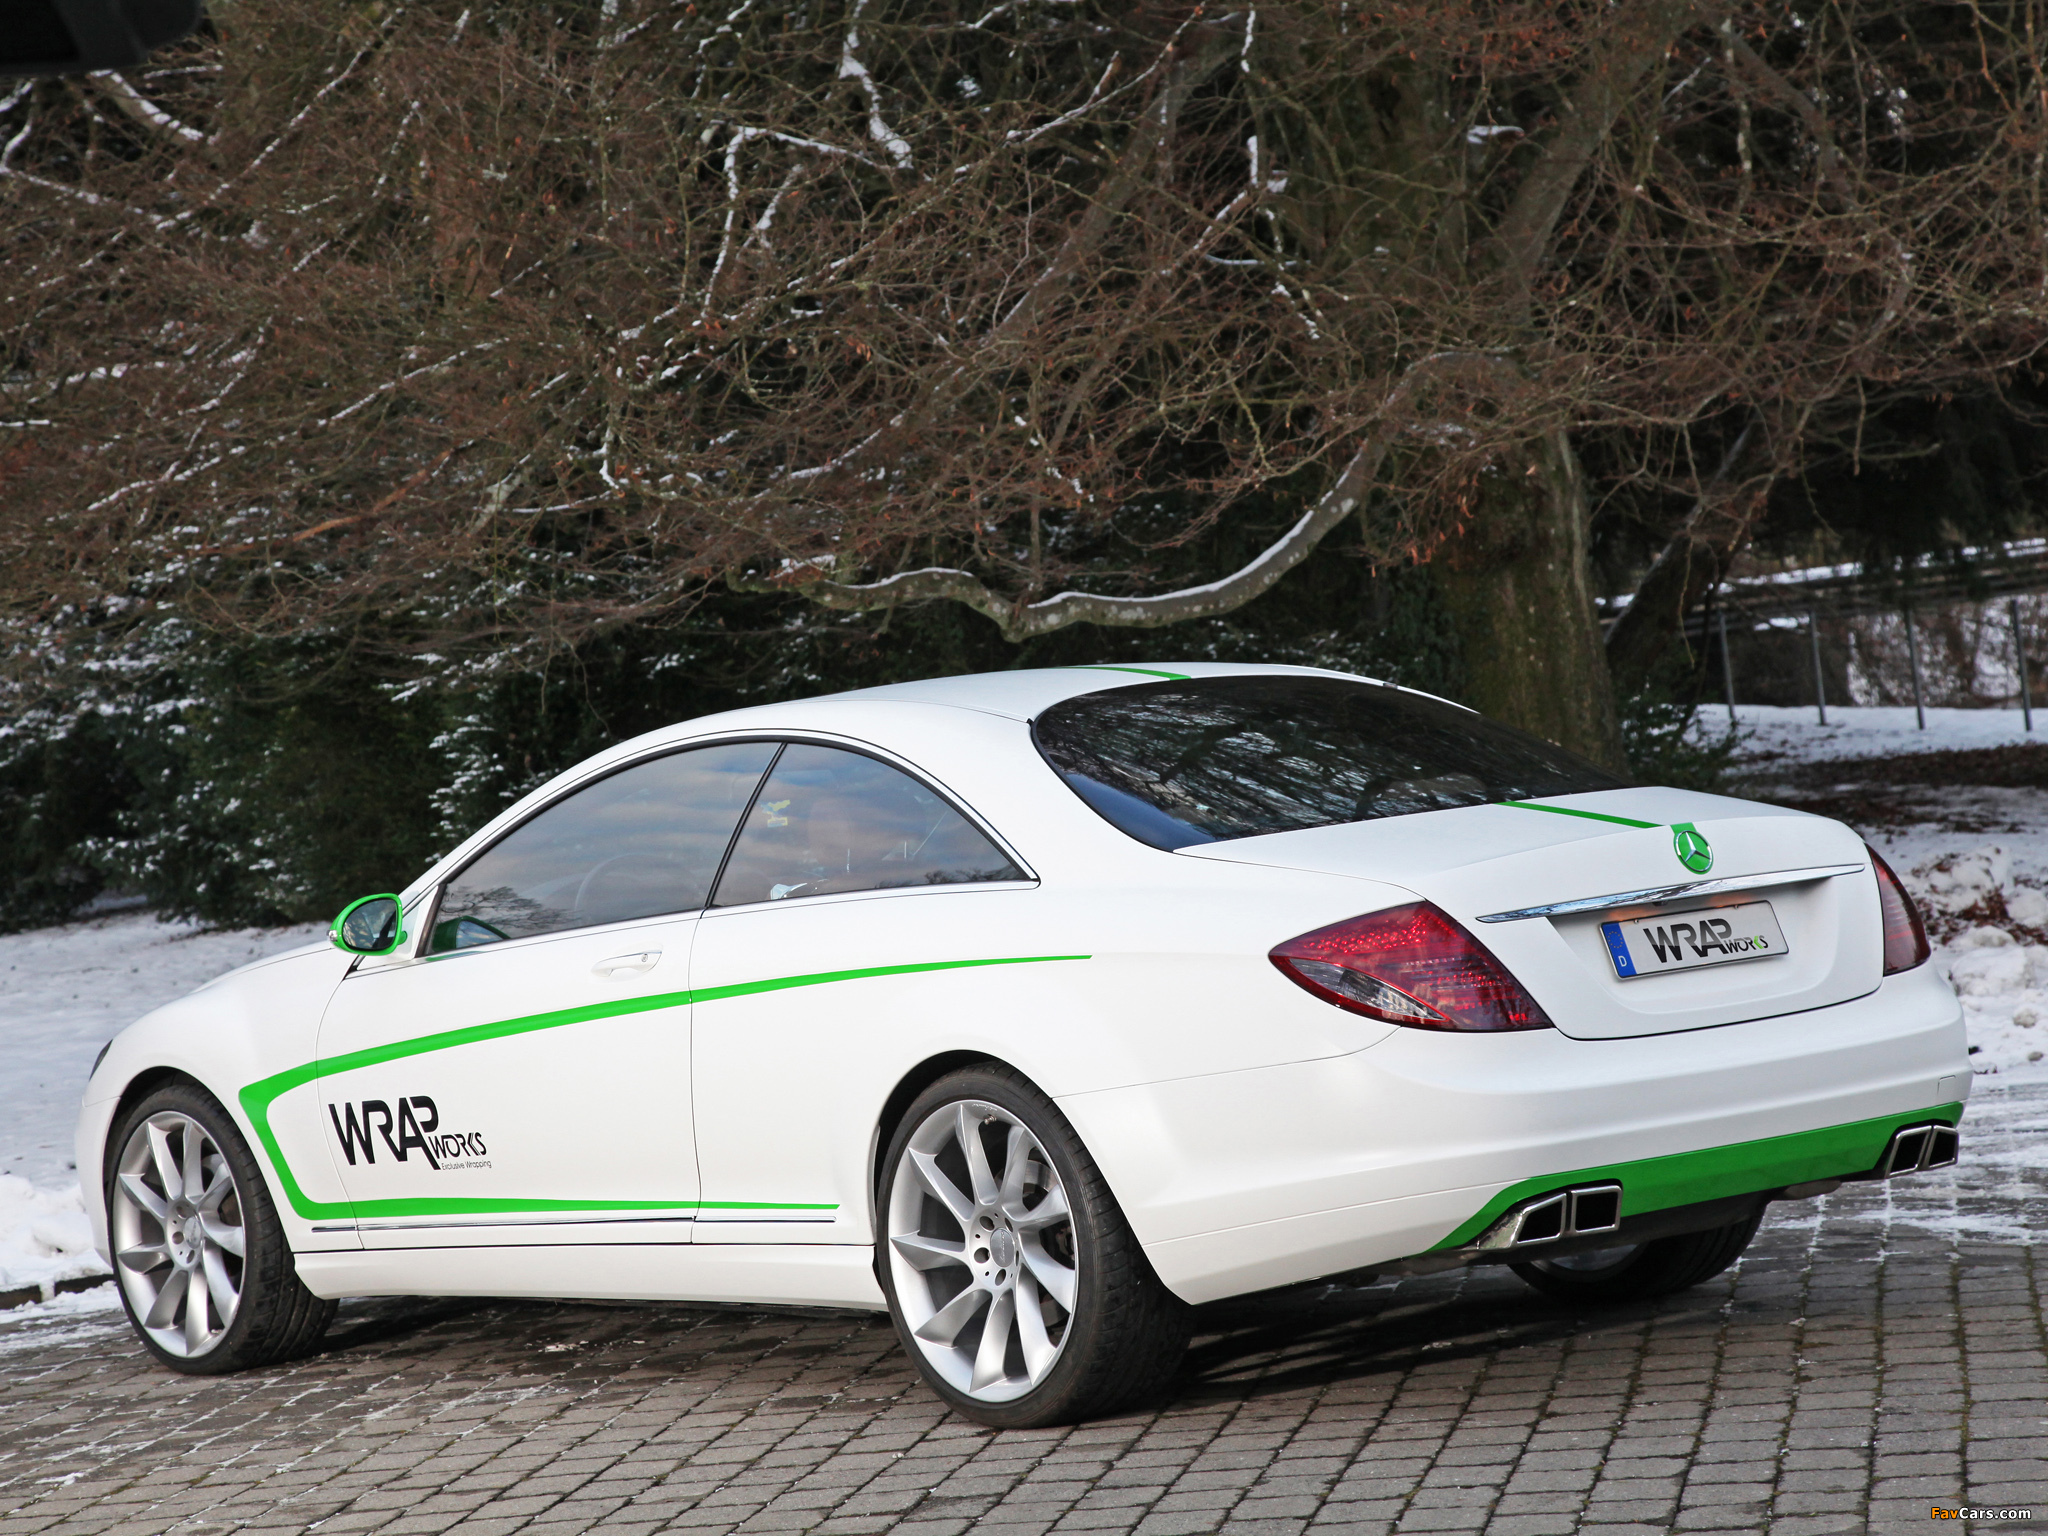 Wrap Works Mercedes-Benz CL 500 (C216) 2013 wallpapers (2048 x 1536)